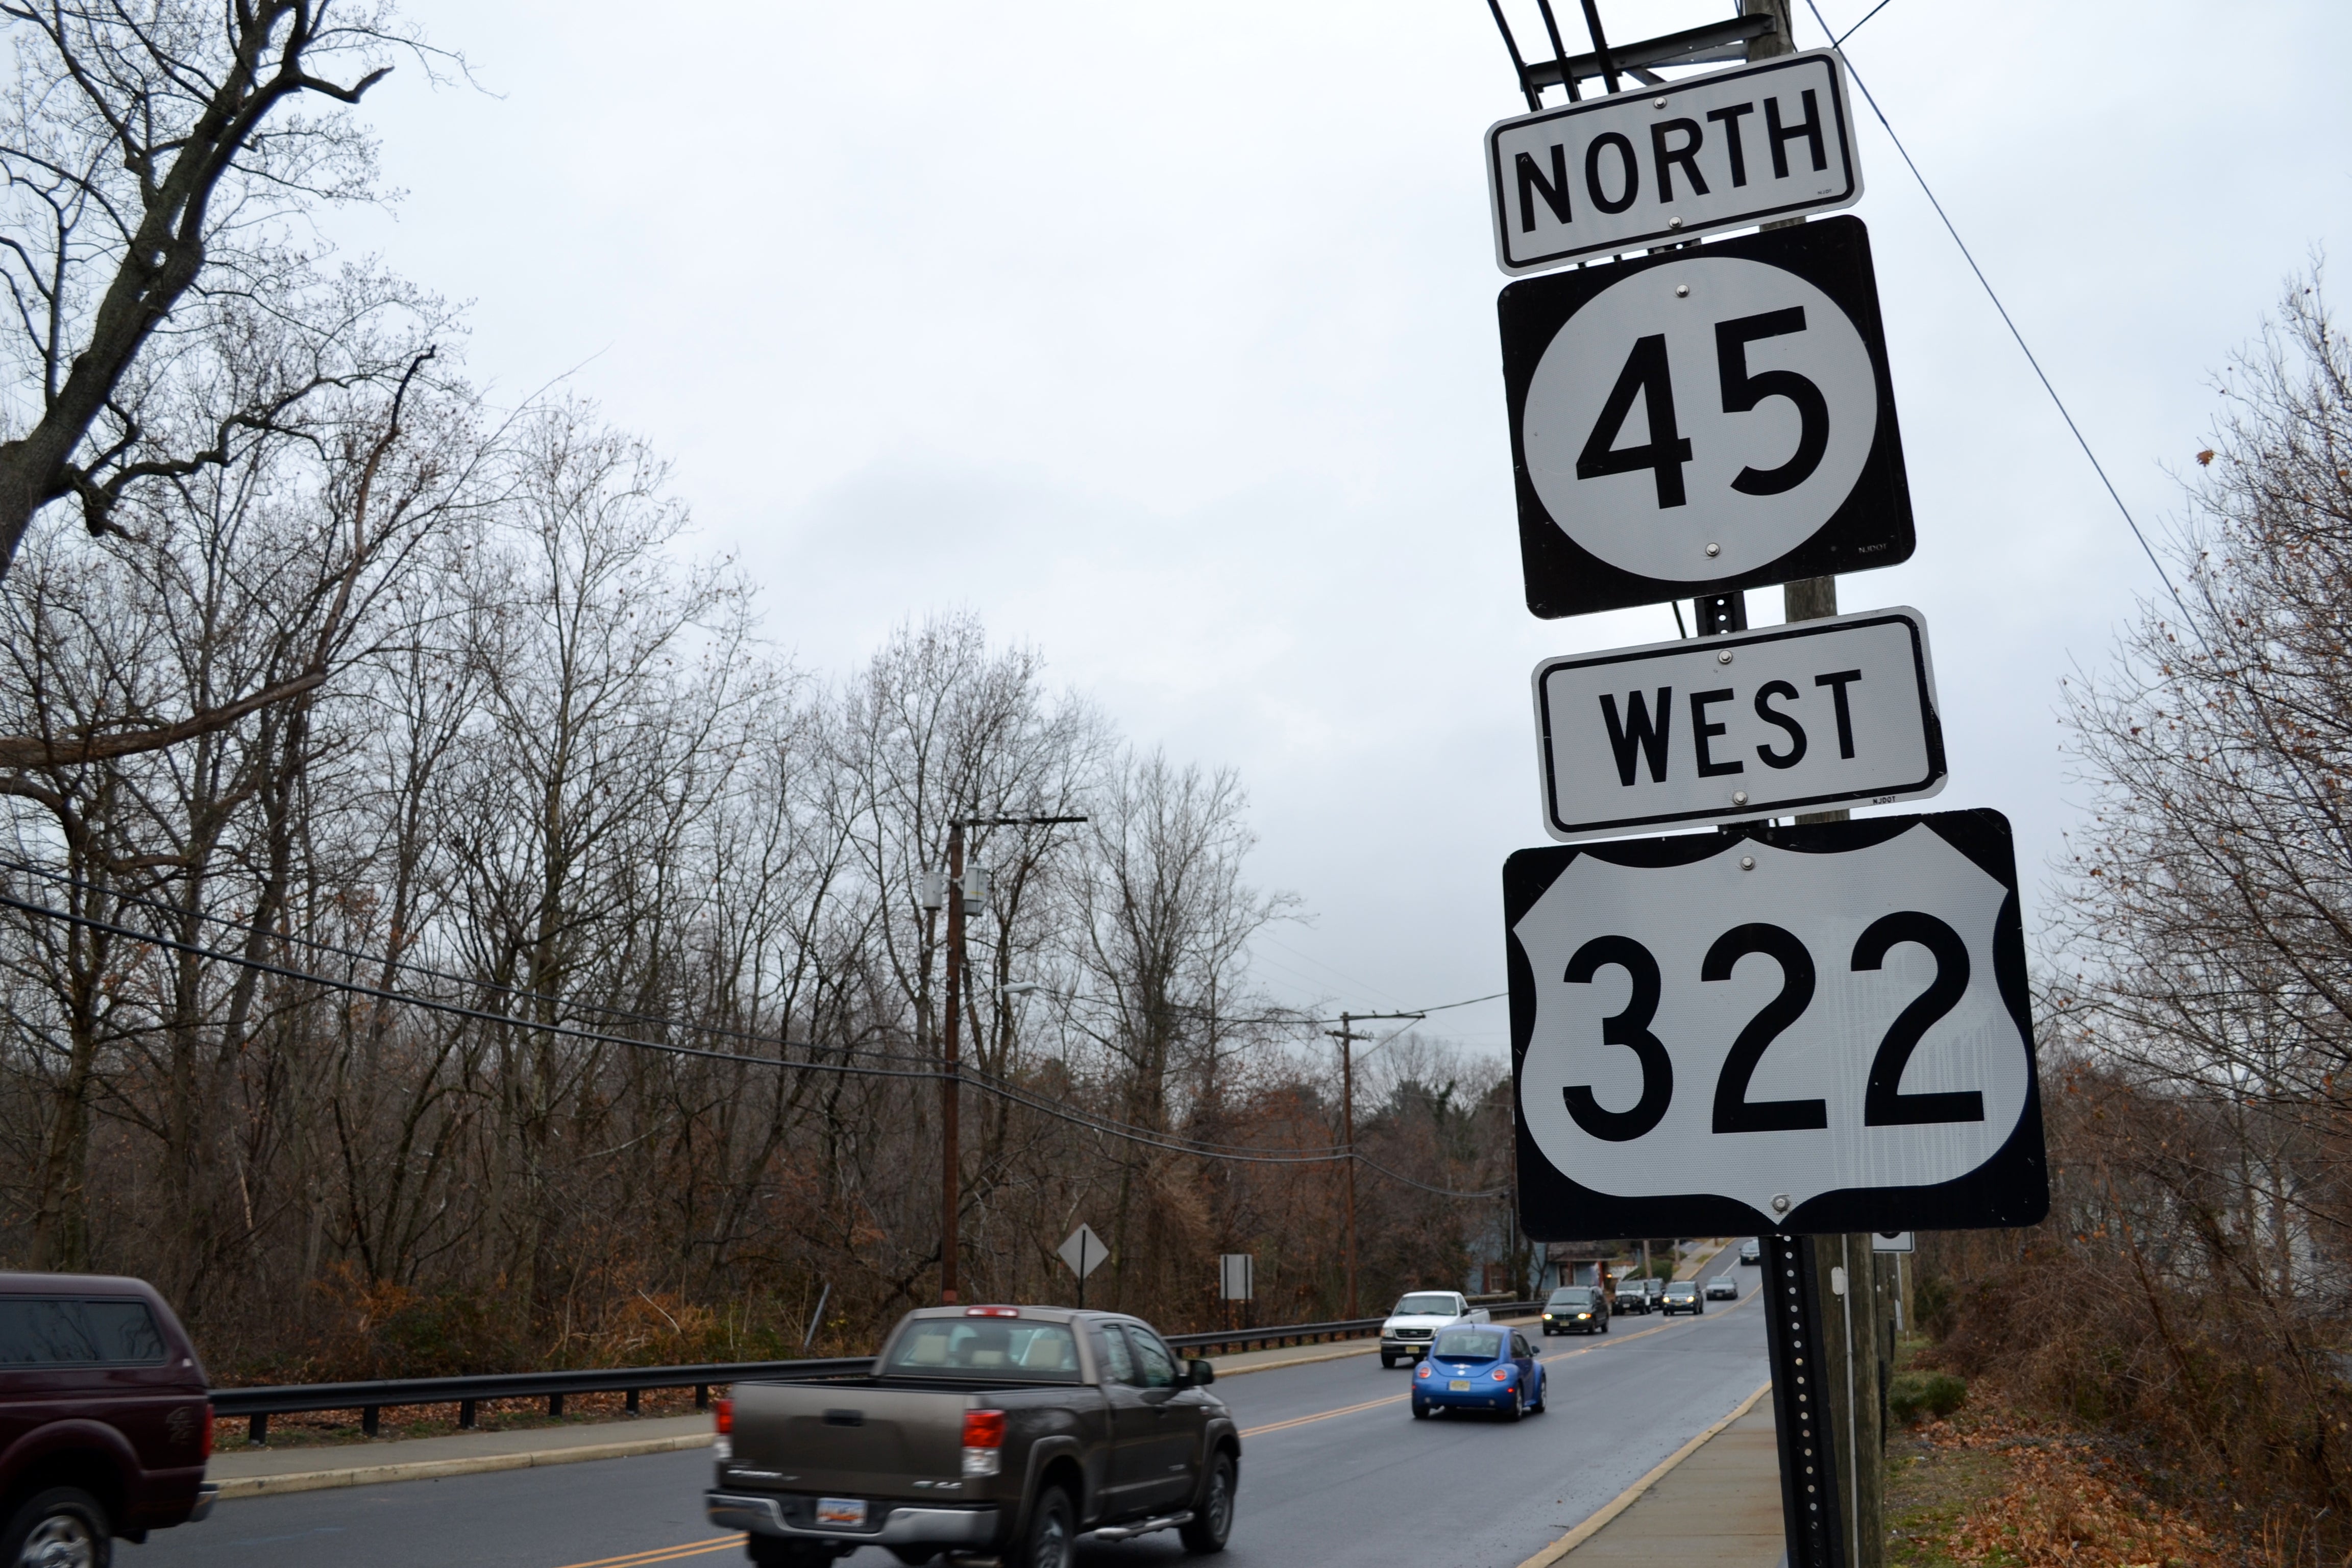 Part of the congestion problem was due to the fact that Route 322 met and joined Route 45 through Mullica Hill